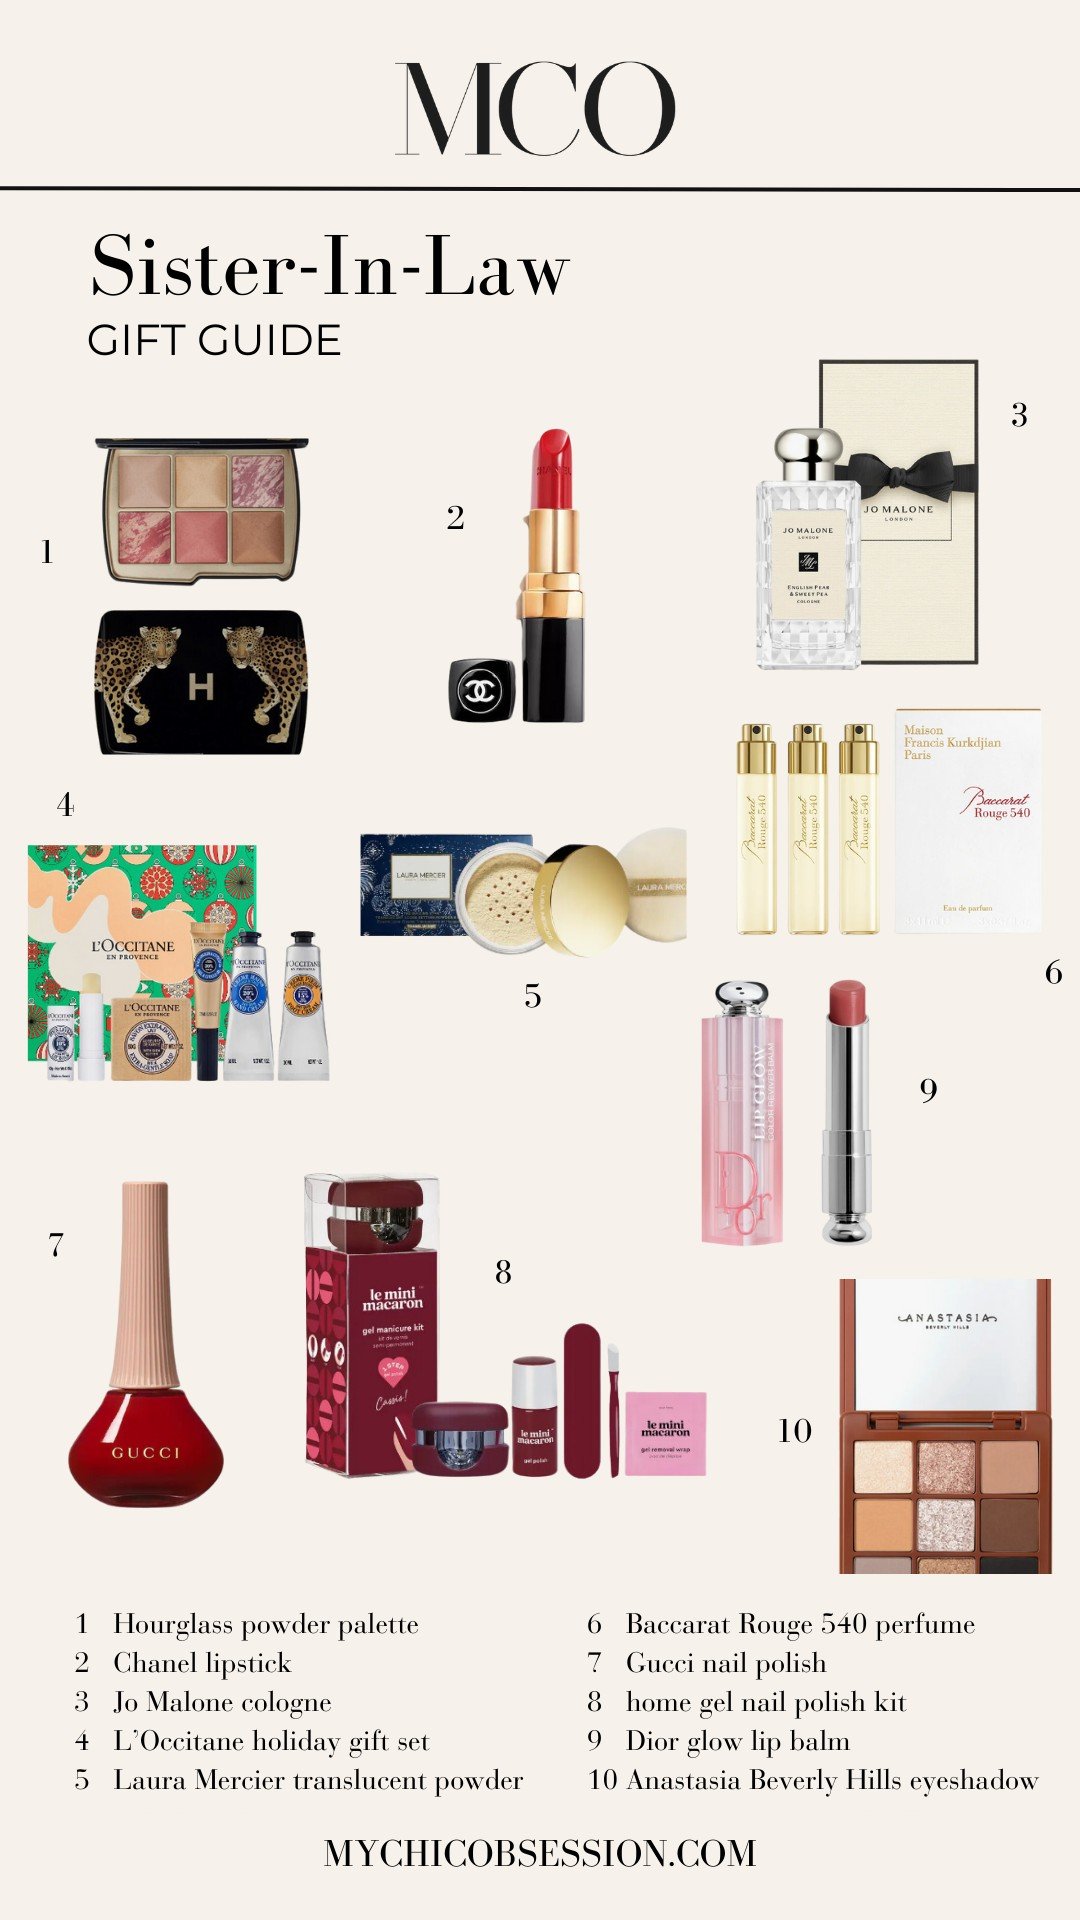 Gifts for the sister-in-law who loves beauty